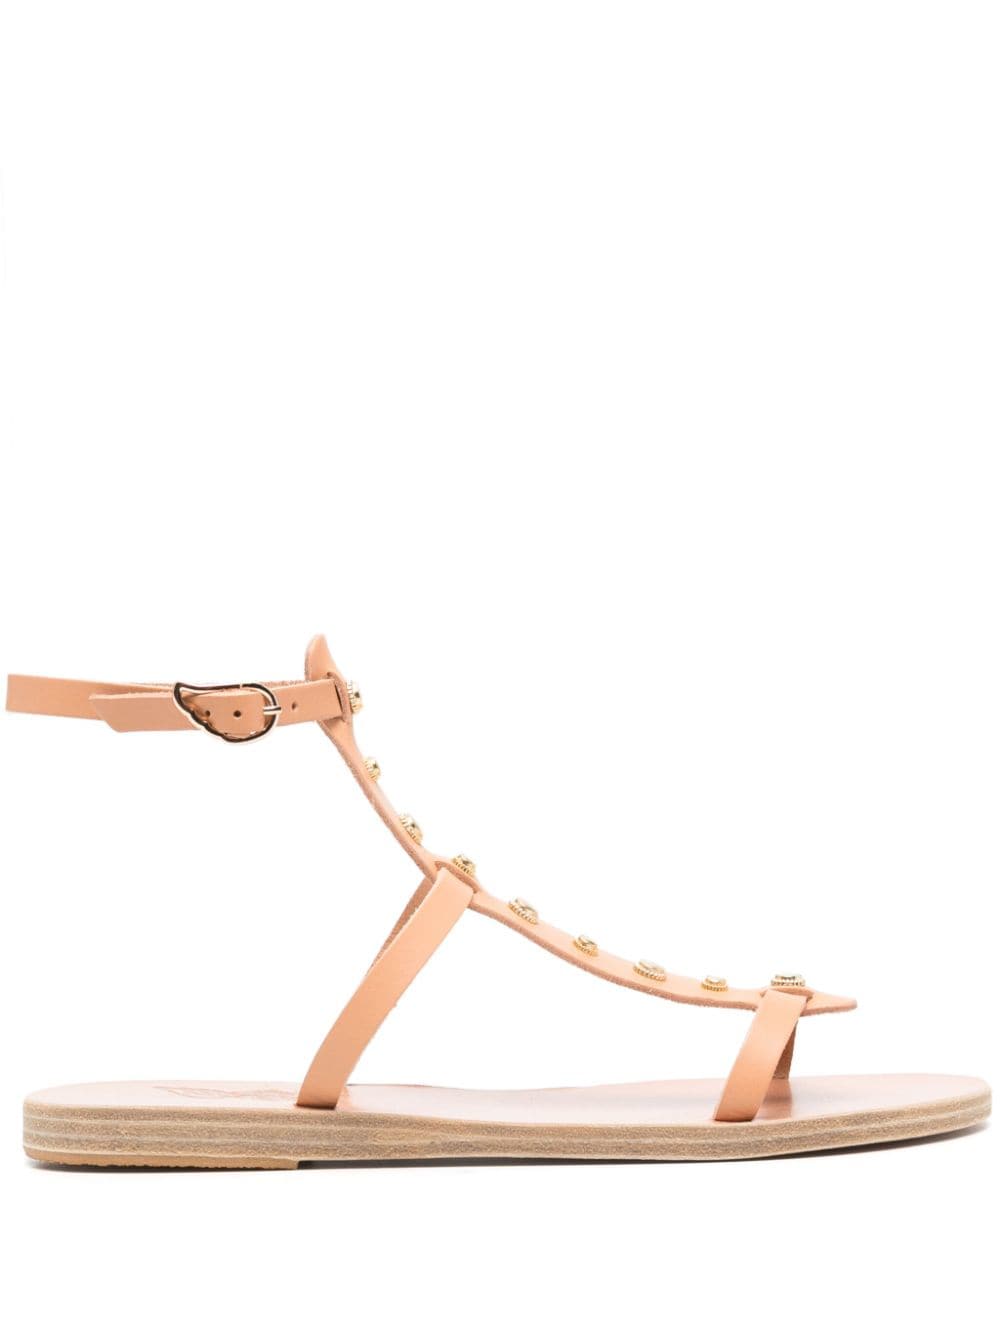 Meliti Bee lether flat sandals